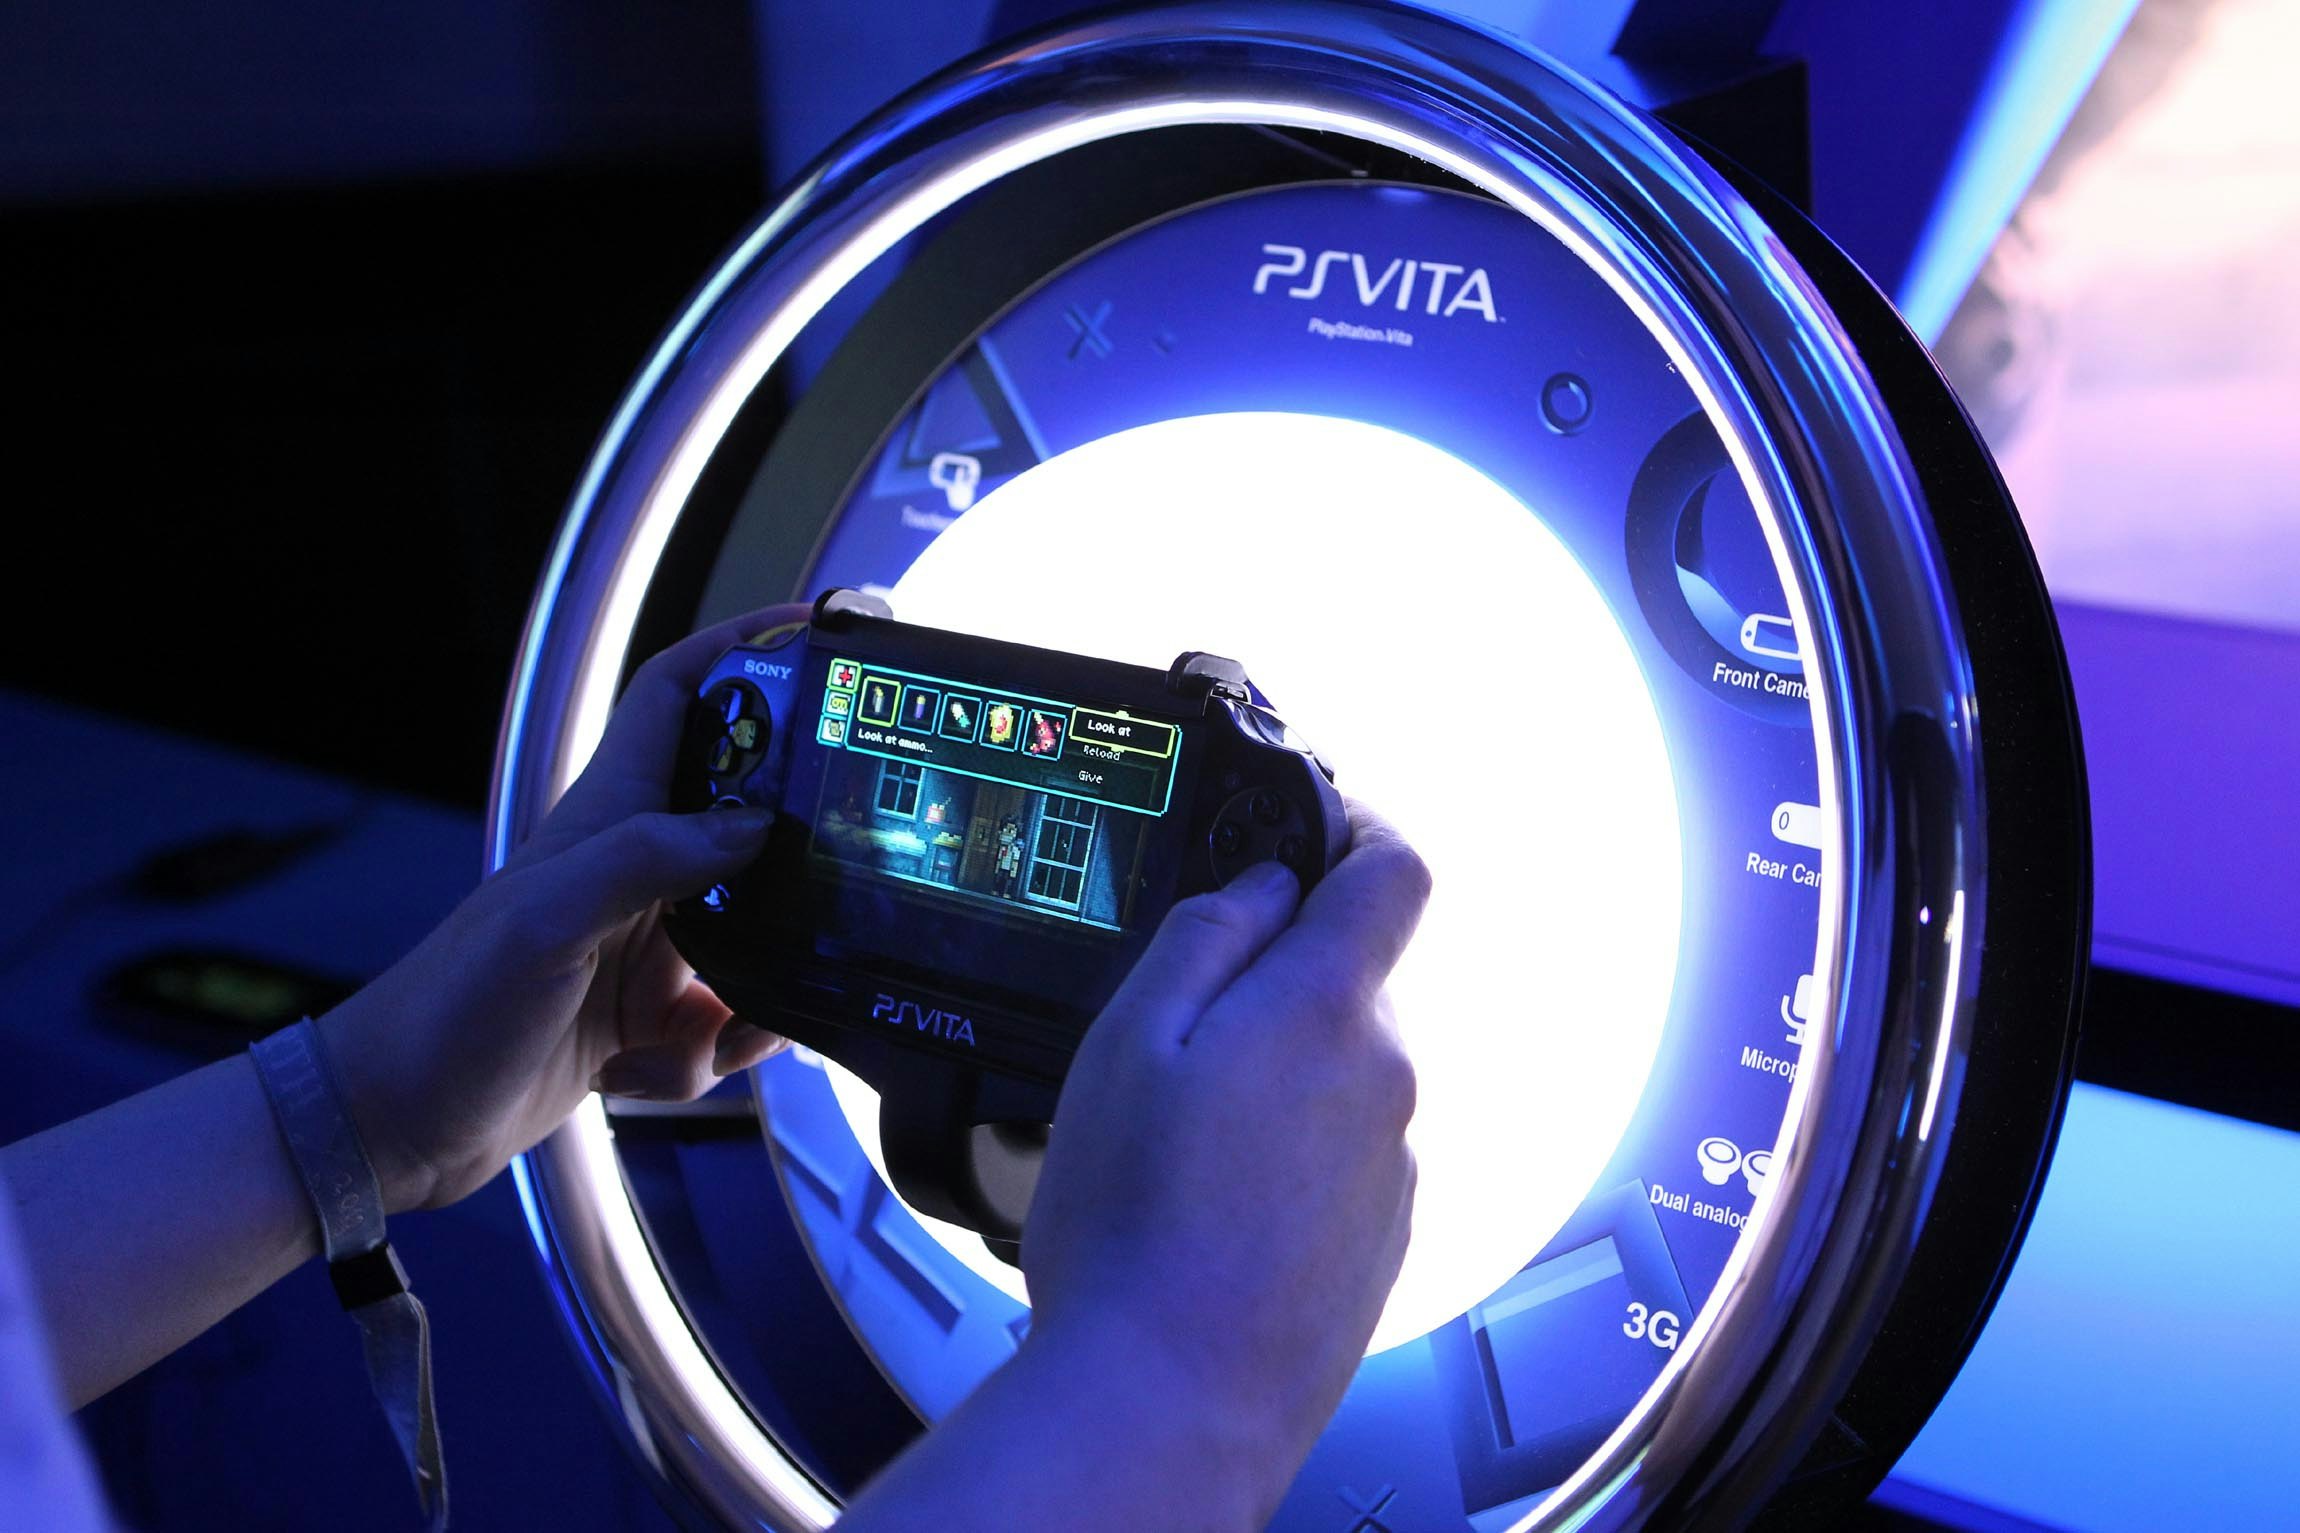 PS Vita's 10 all-time best games, ranked